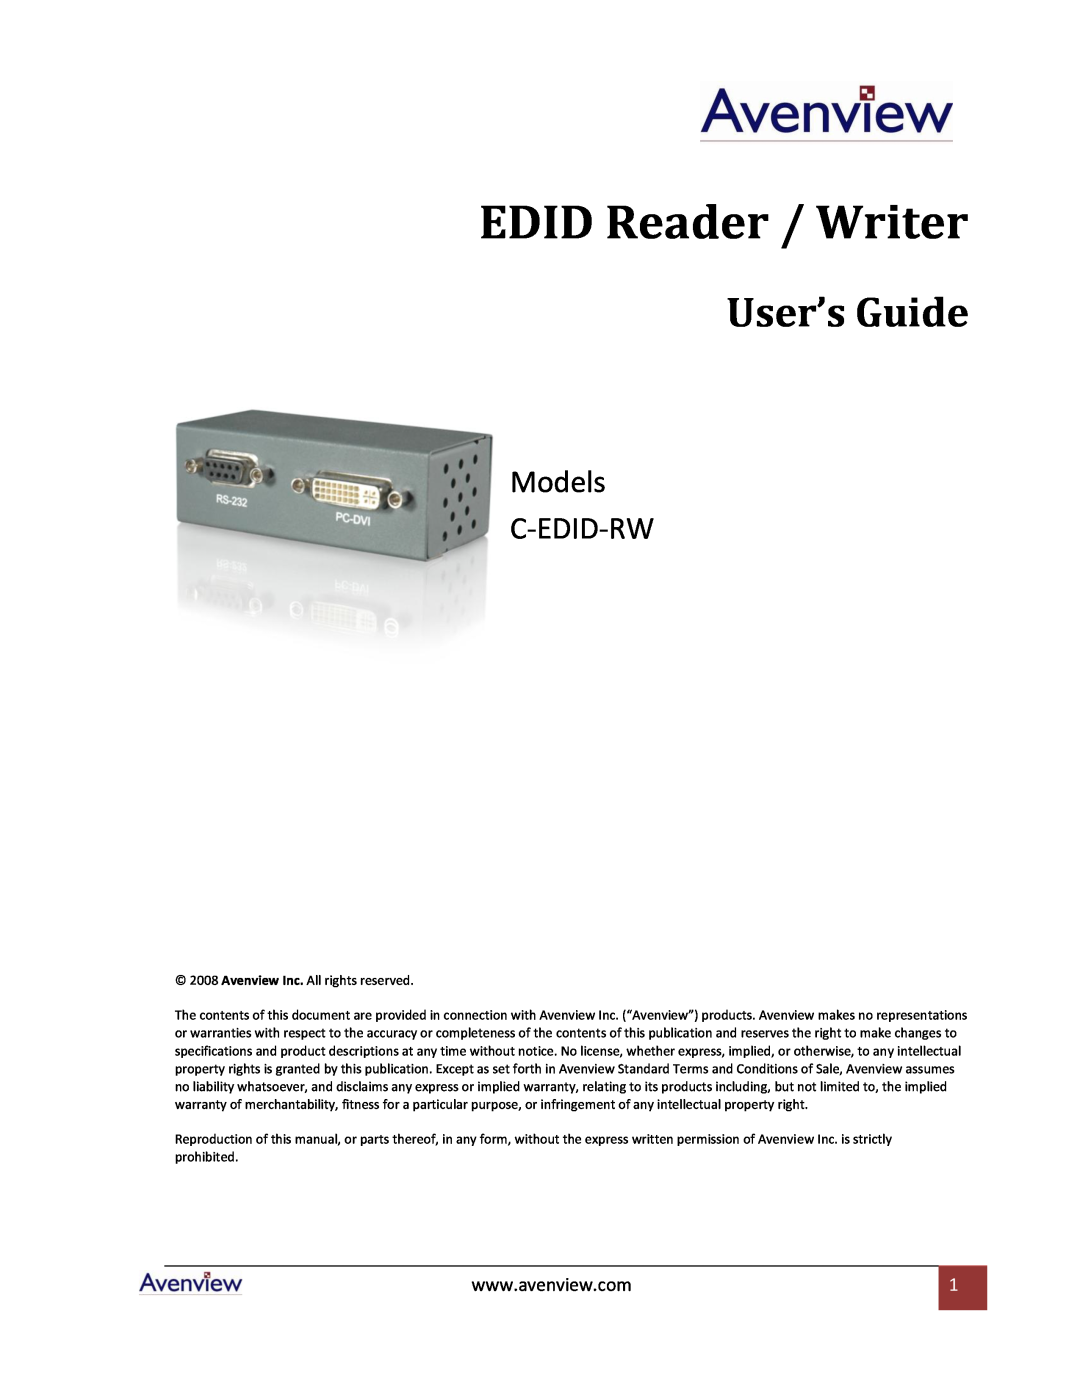 Avenview specifications EDID Reader / Writer, User’s Guide, Models C-EDID-RW 